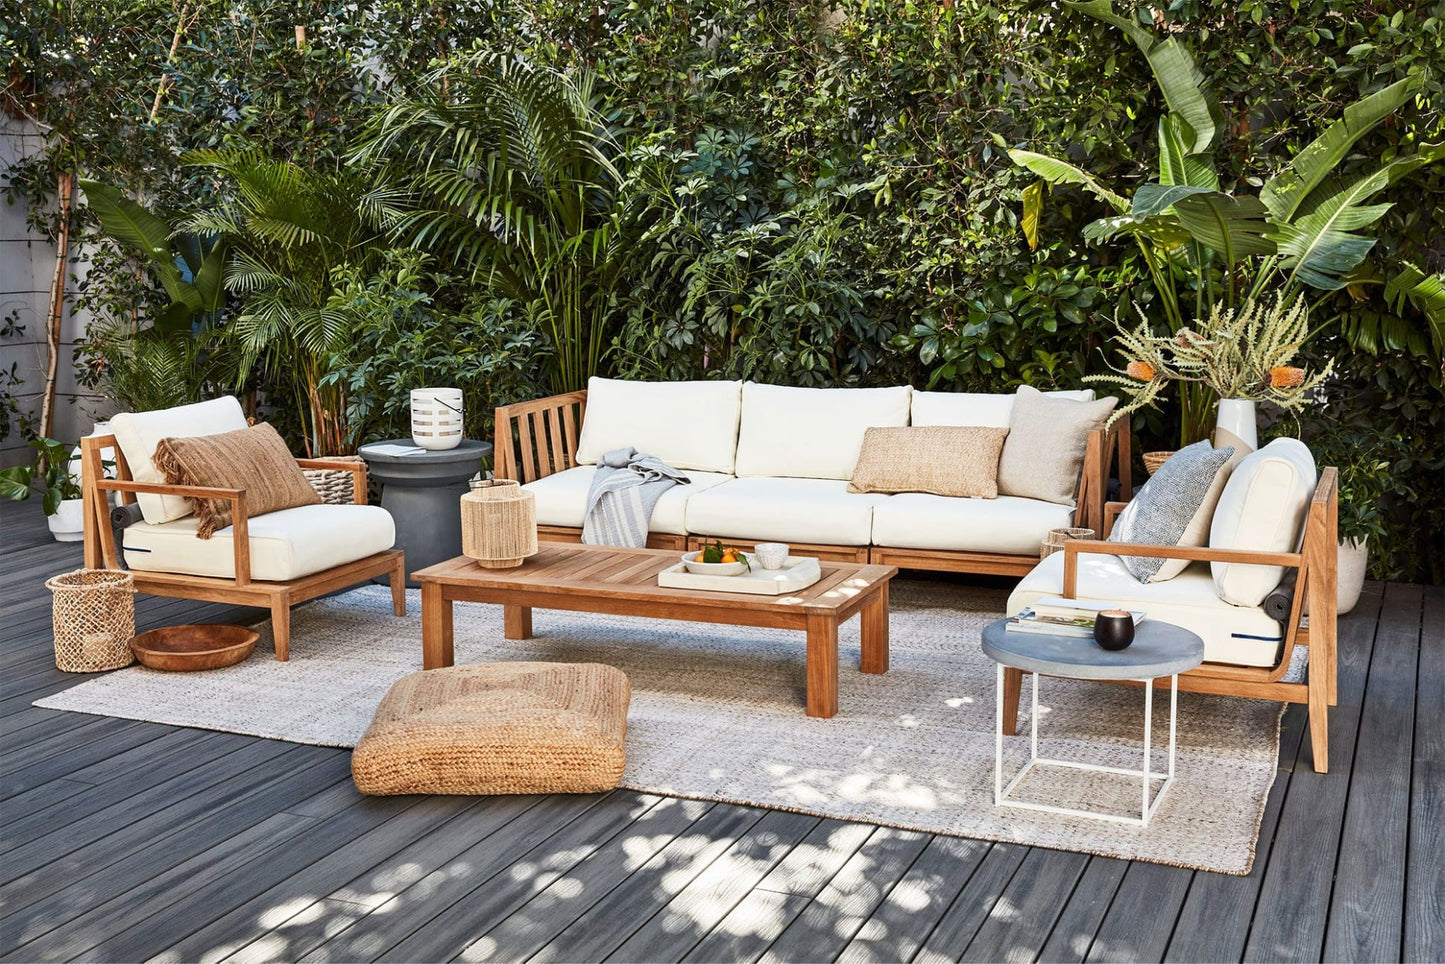 Live Outer 127" Teak Outdoor Sofa With Armchairs and Palisades Cream Cushion (6-Seat)